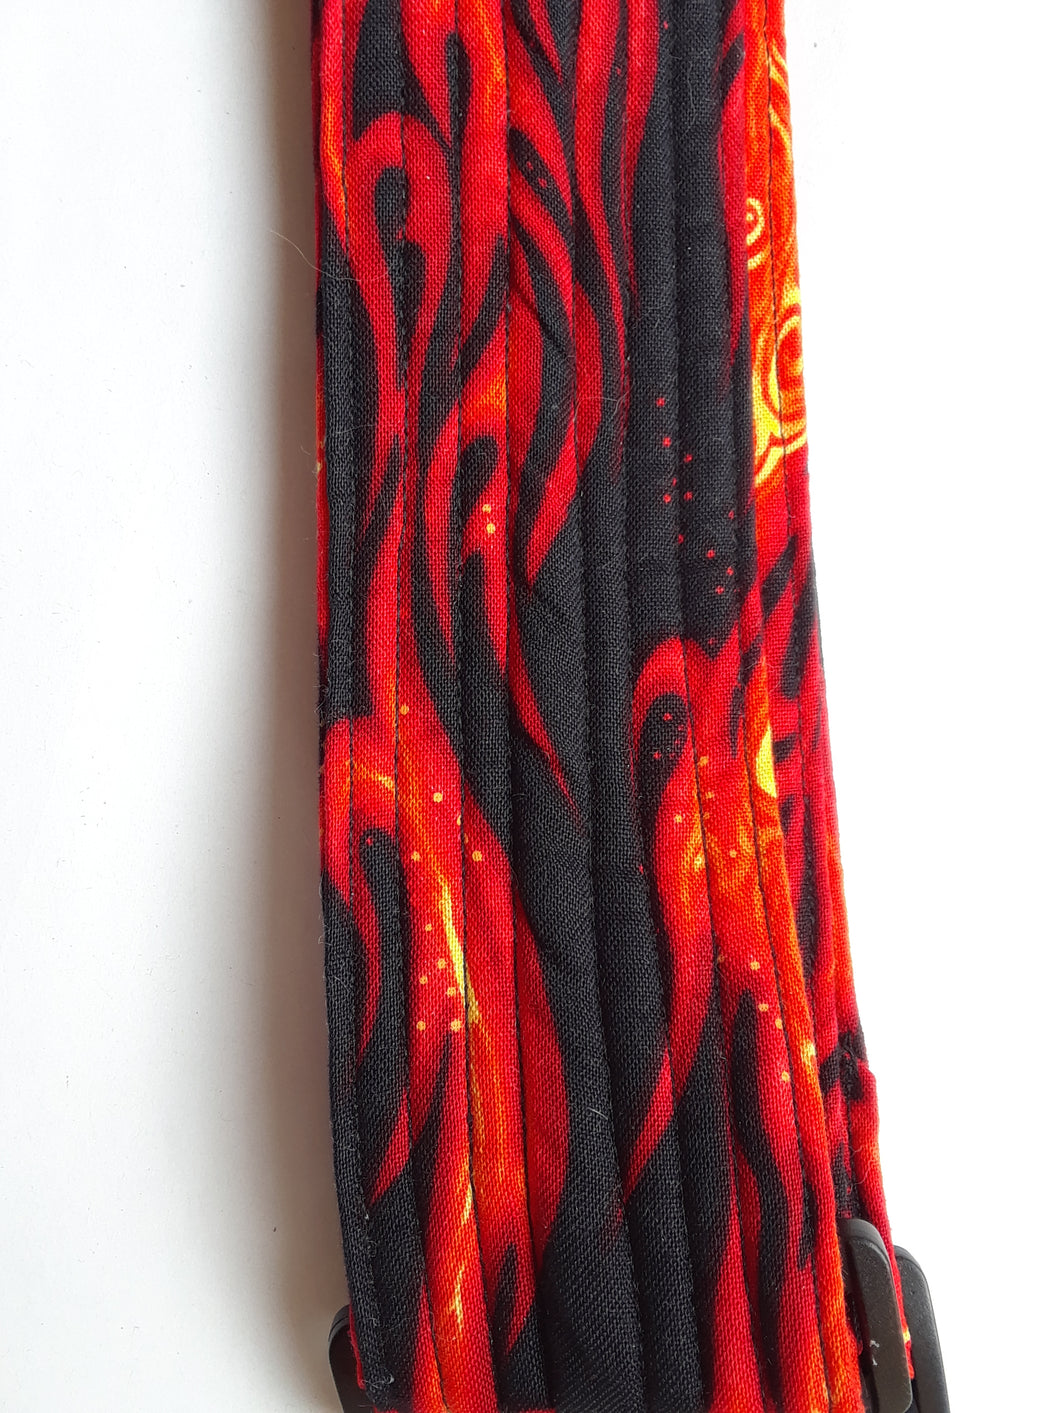 Flame On! Guitar Strap